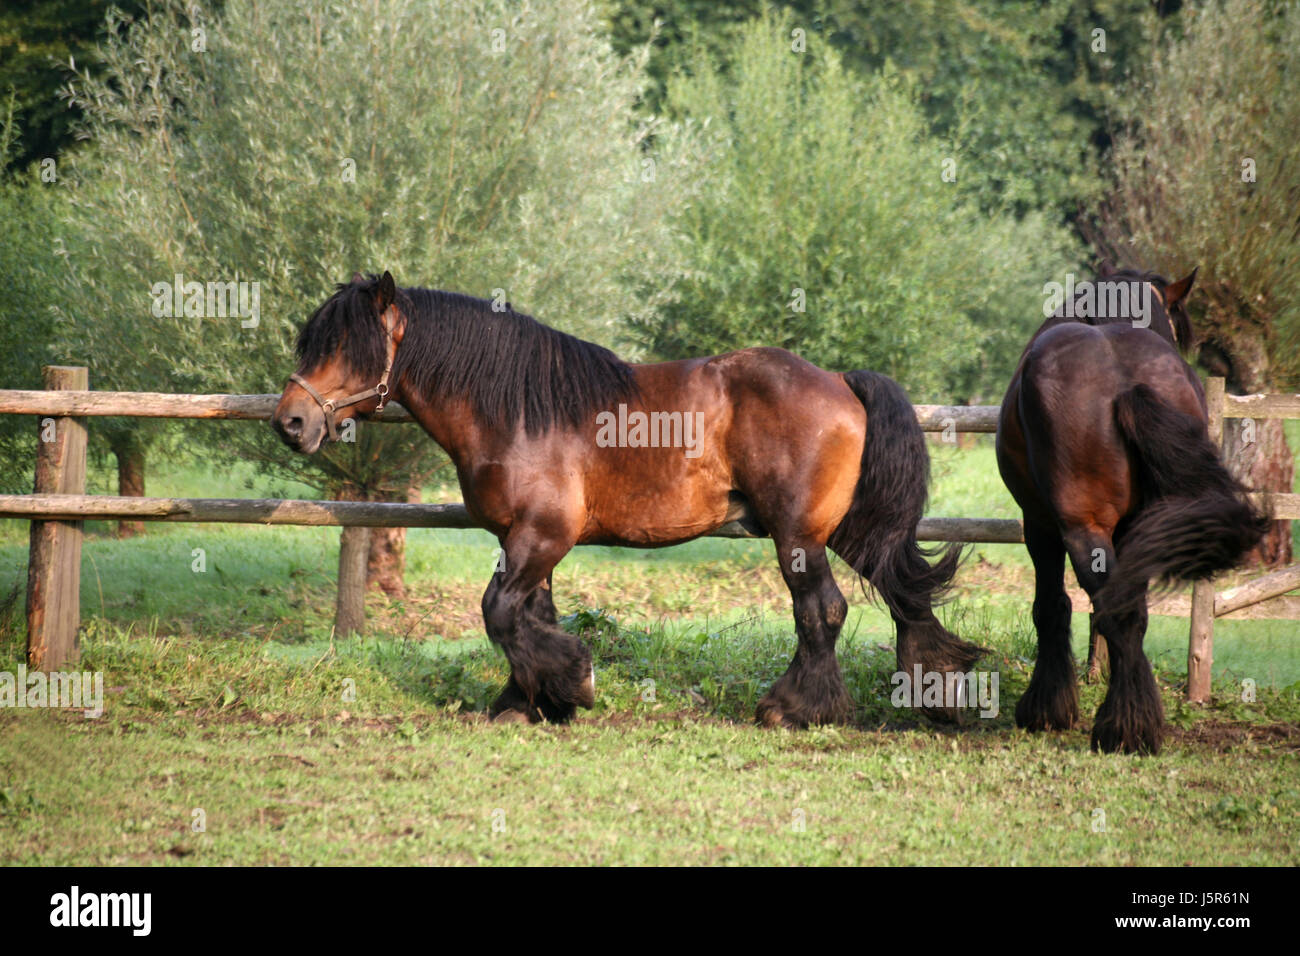 horse animal brown brownish brunette strong agriculture farming horses halter Stock Photo